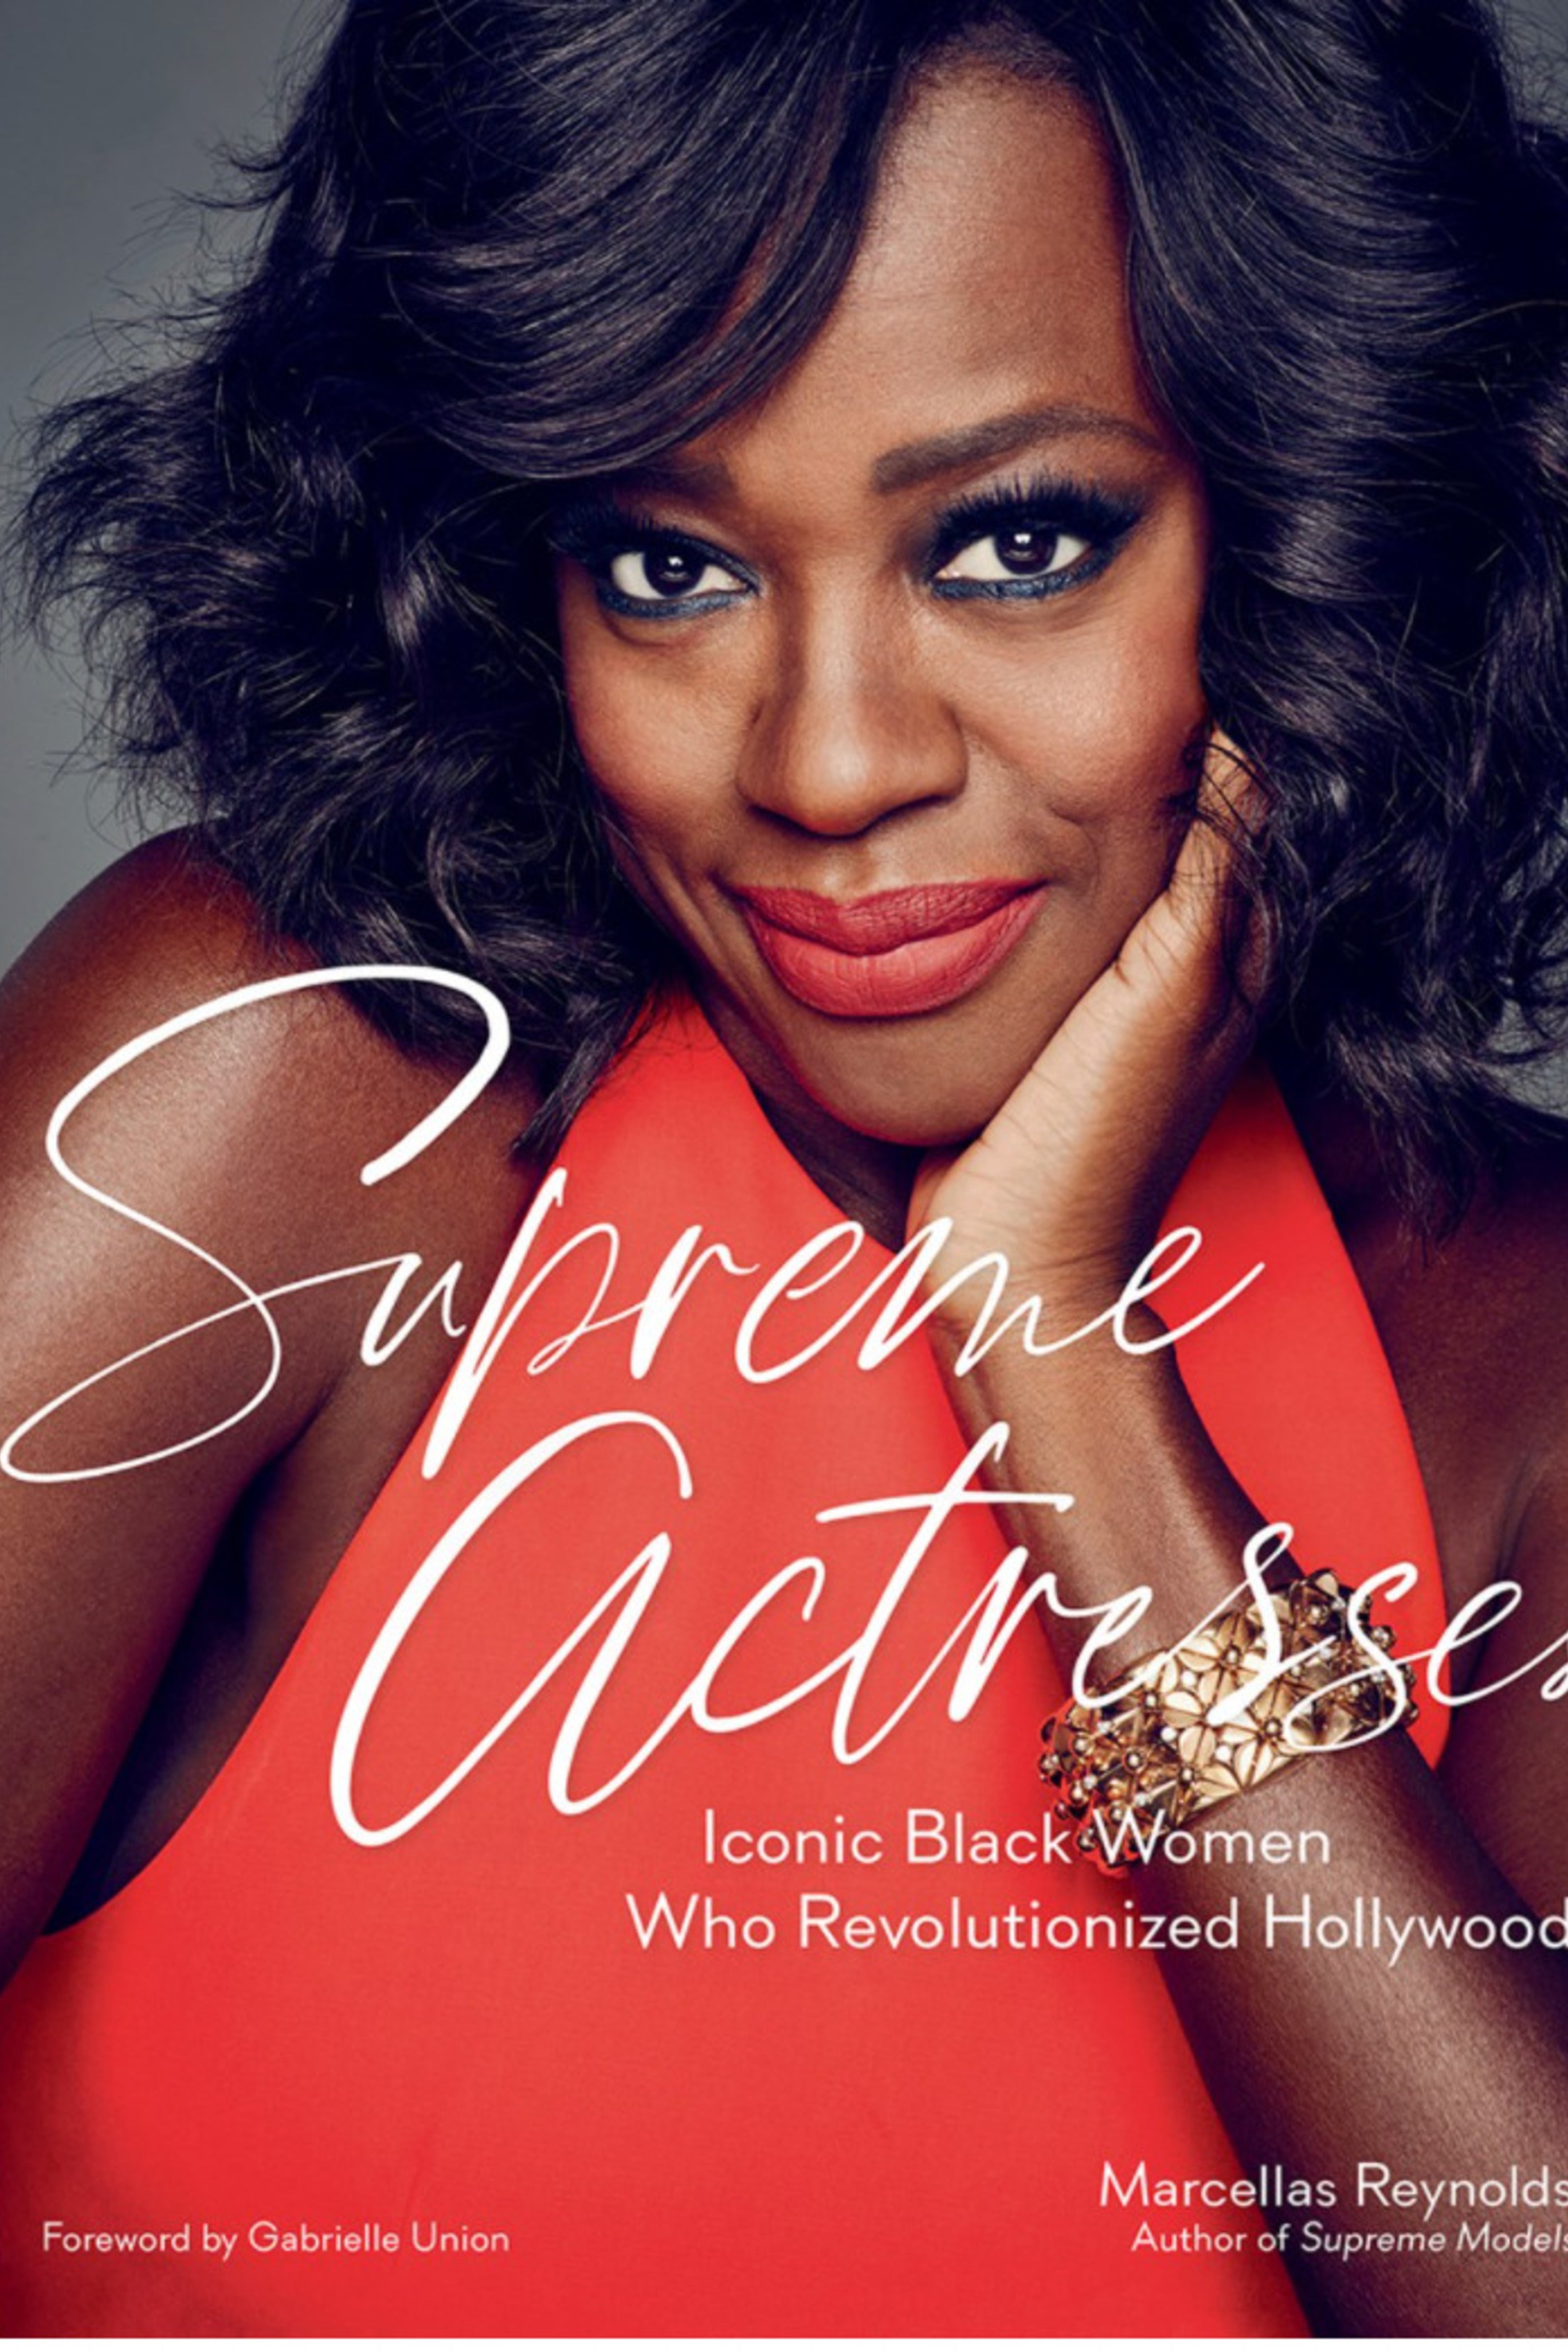 "Supreme Actresses: Iconic Black Women Who Revolutionized Hollywood" Book by Marcellas Reynolds